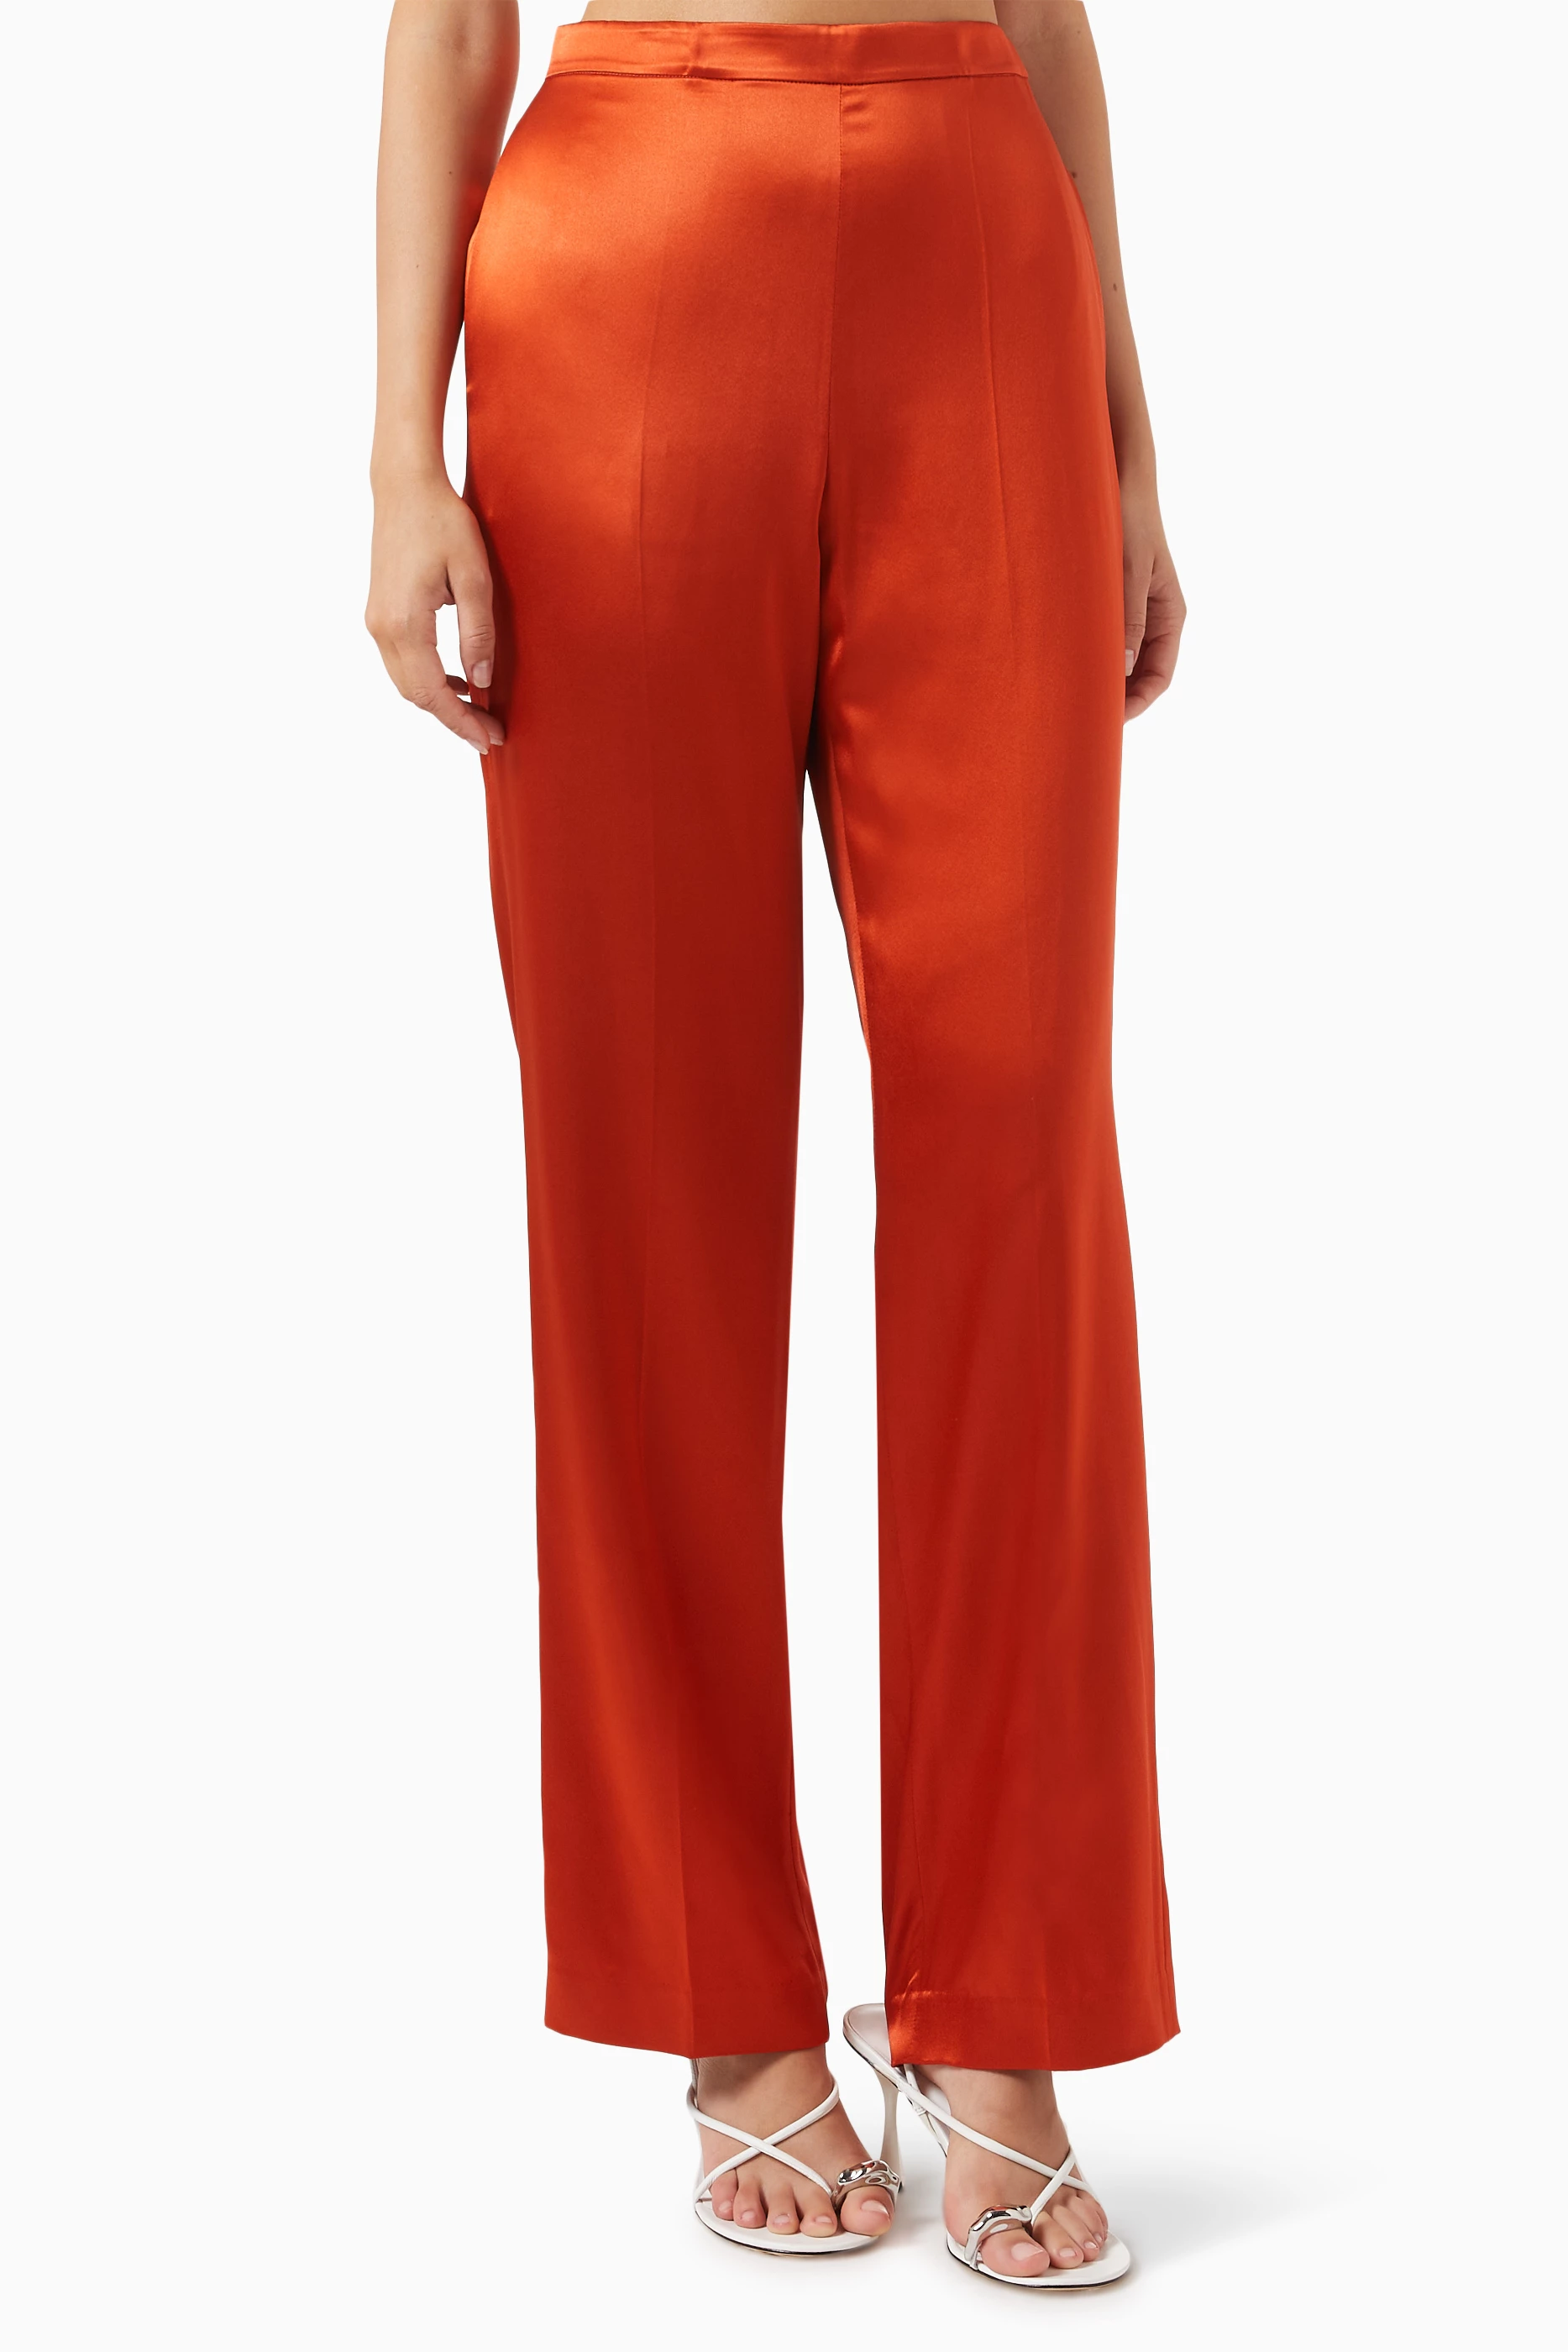 Buy NumBrave Orange Raw Silk Pants with Full Length Cotton Lining for Women  at